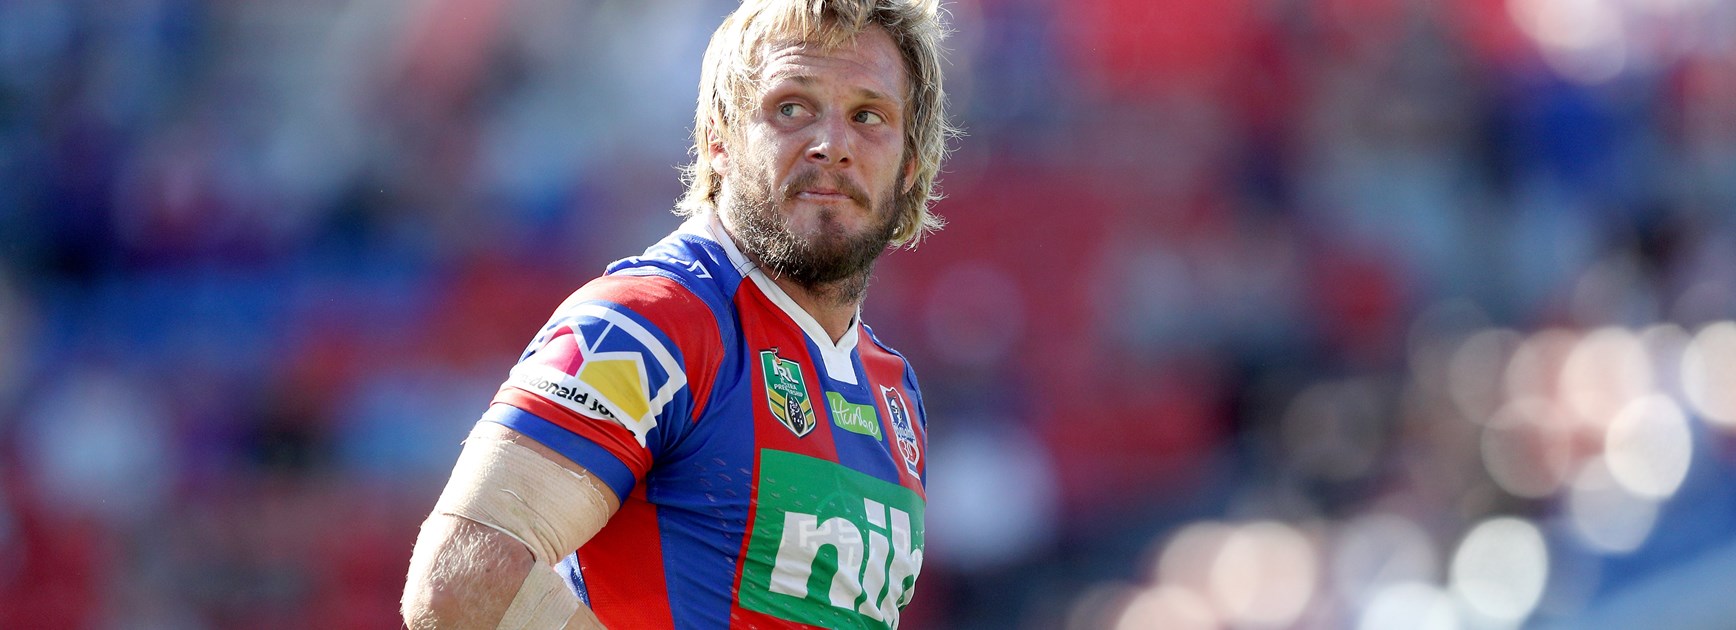 Newcastle Knights winger Nathan Ross.